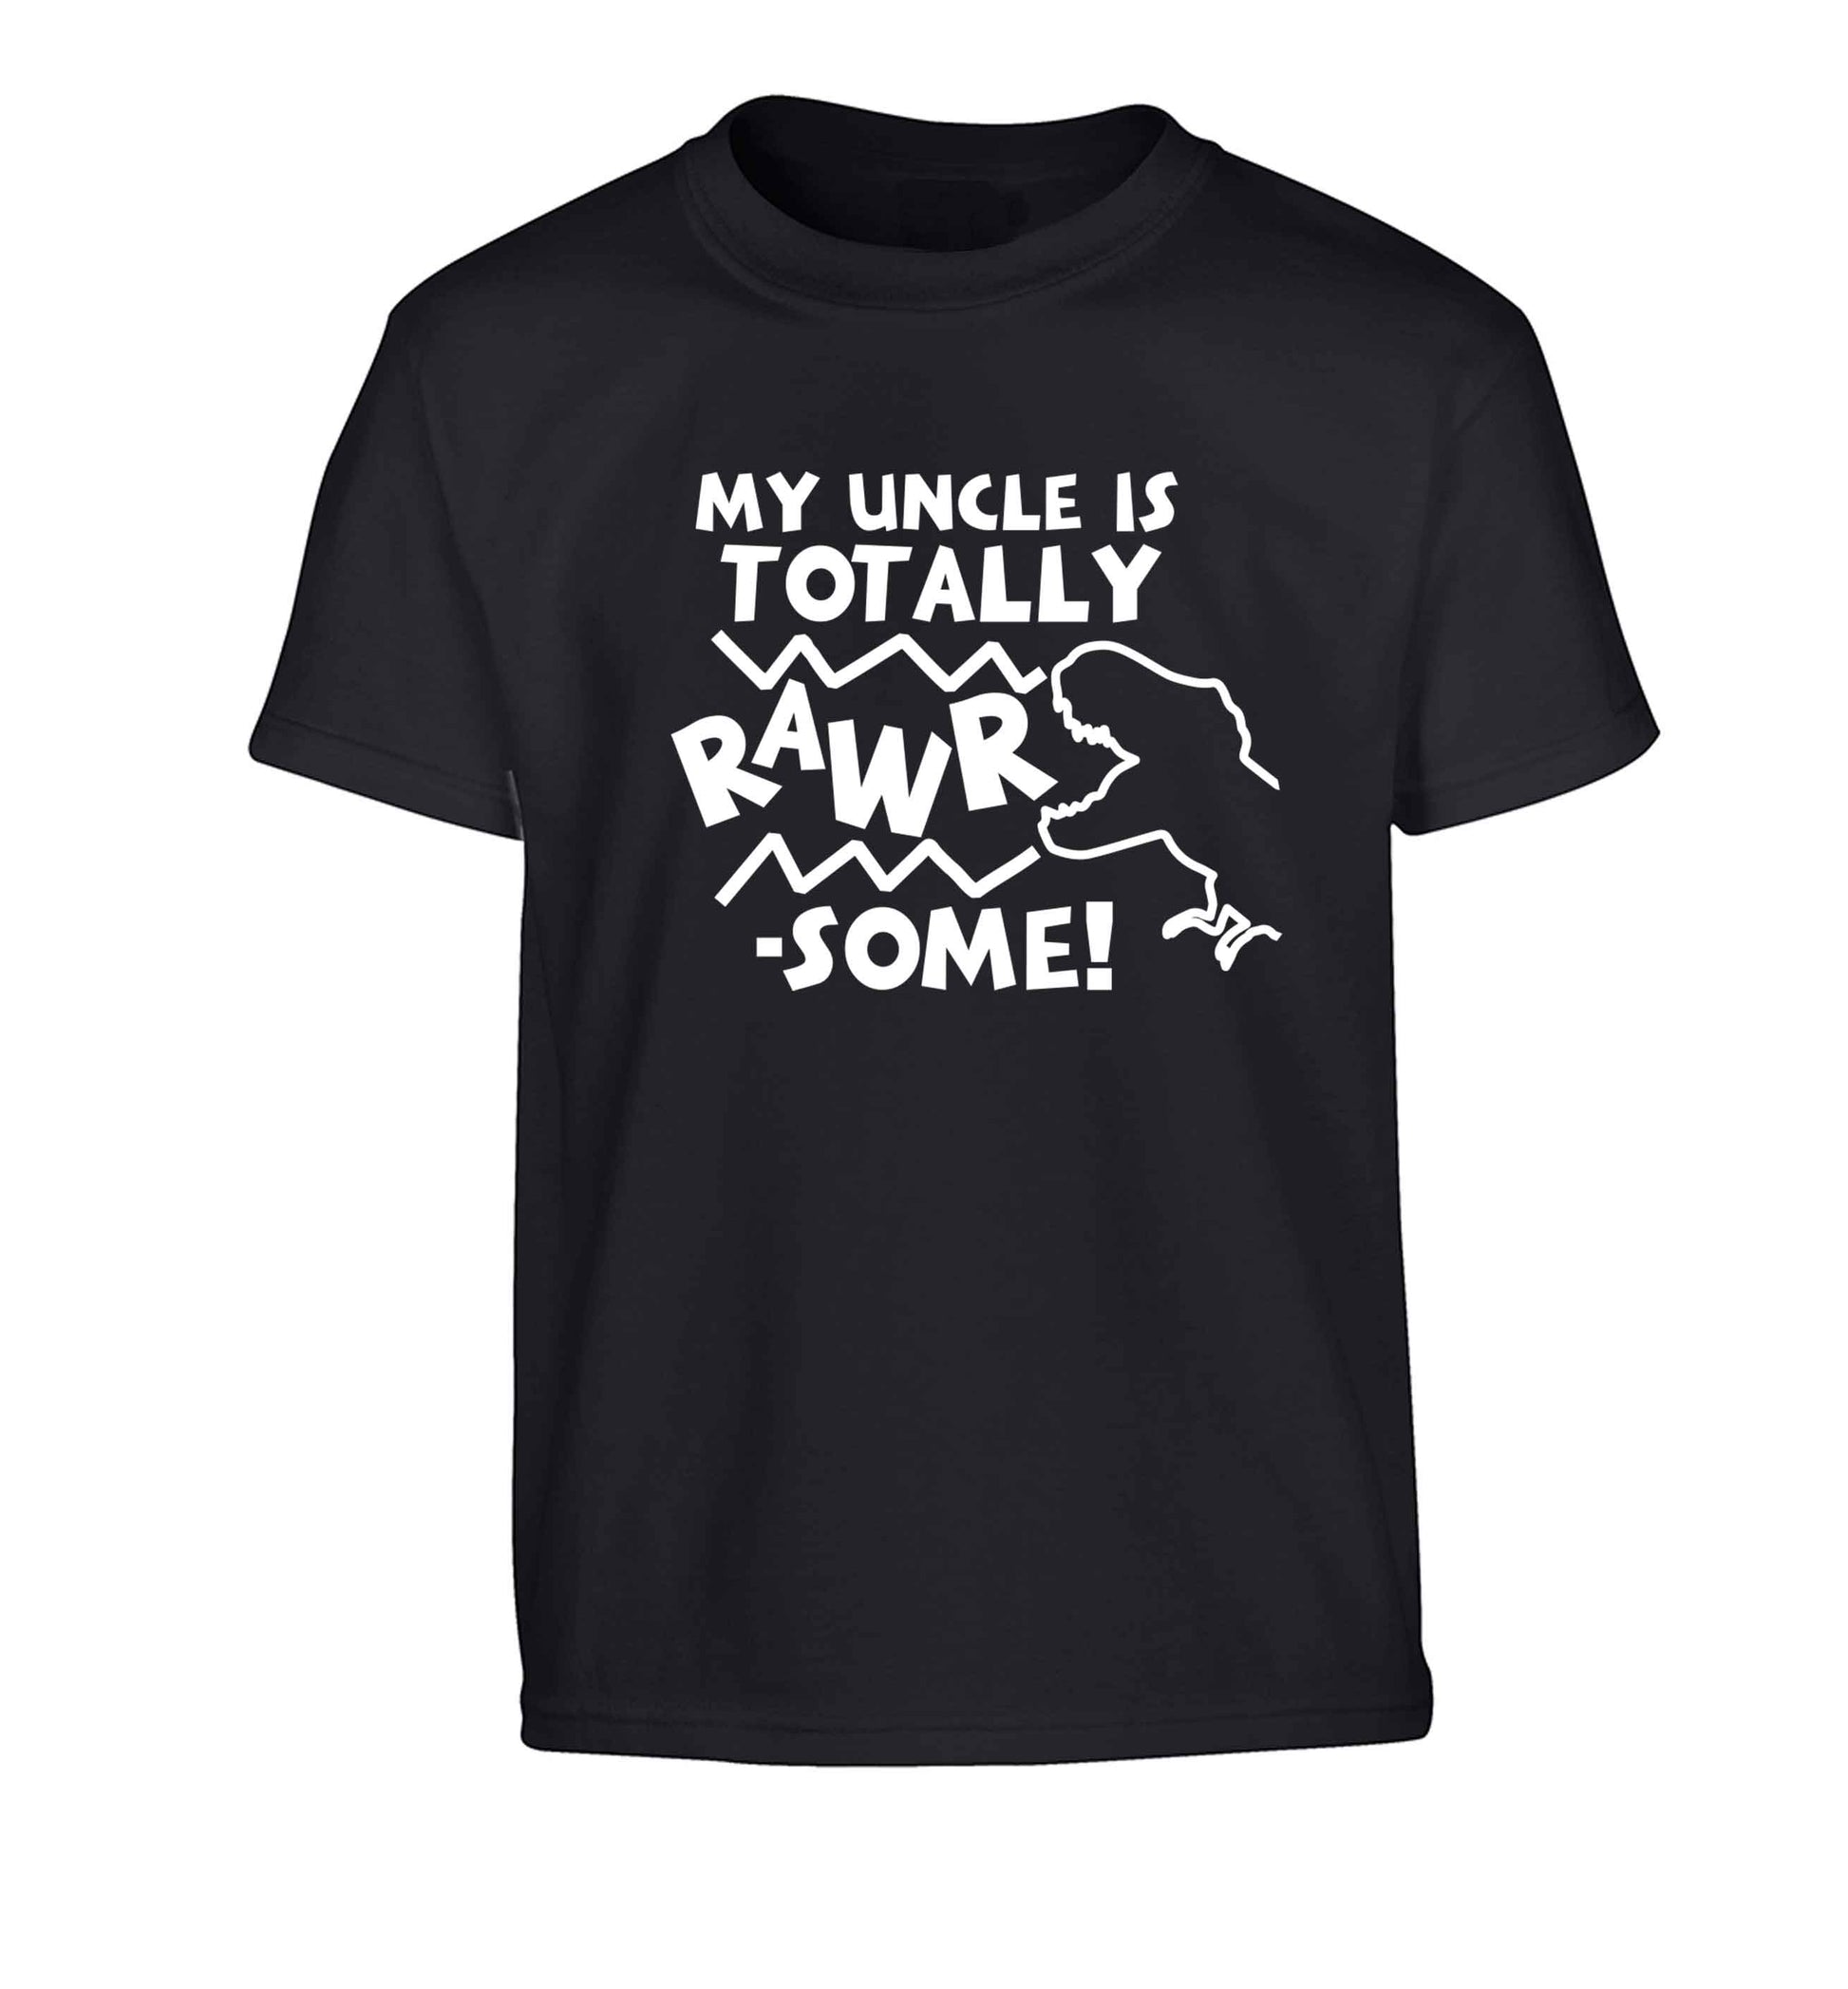 My uncle is totally rawrsome Children's black Tshirt 12-13 Years